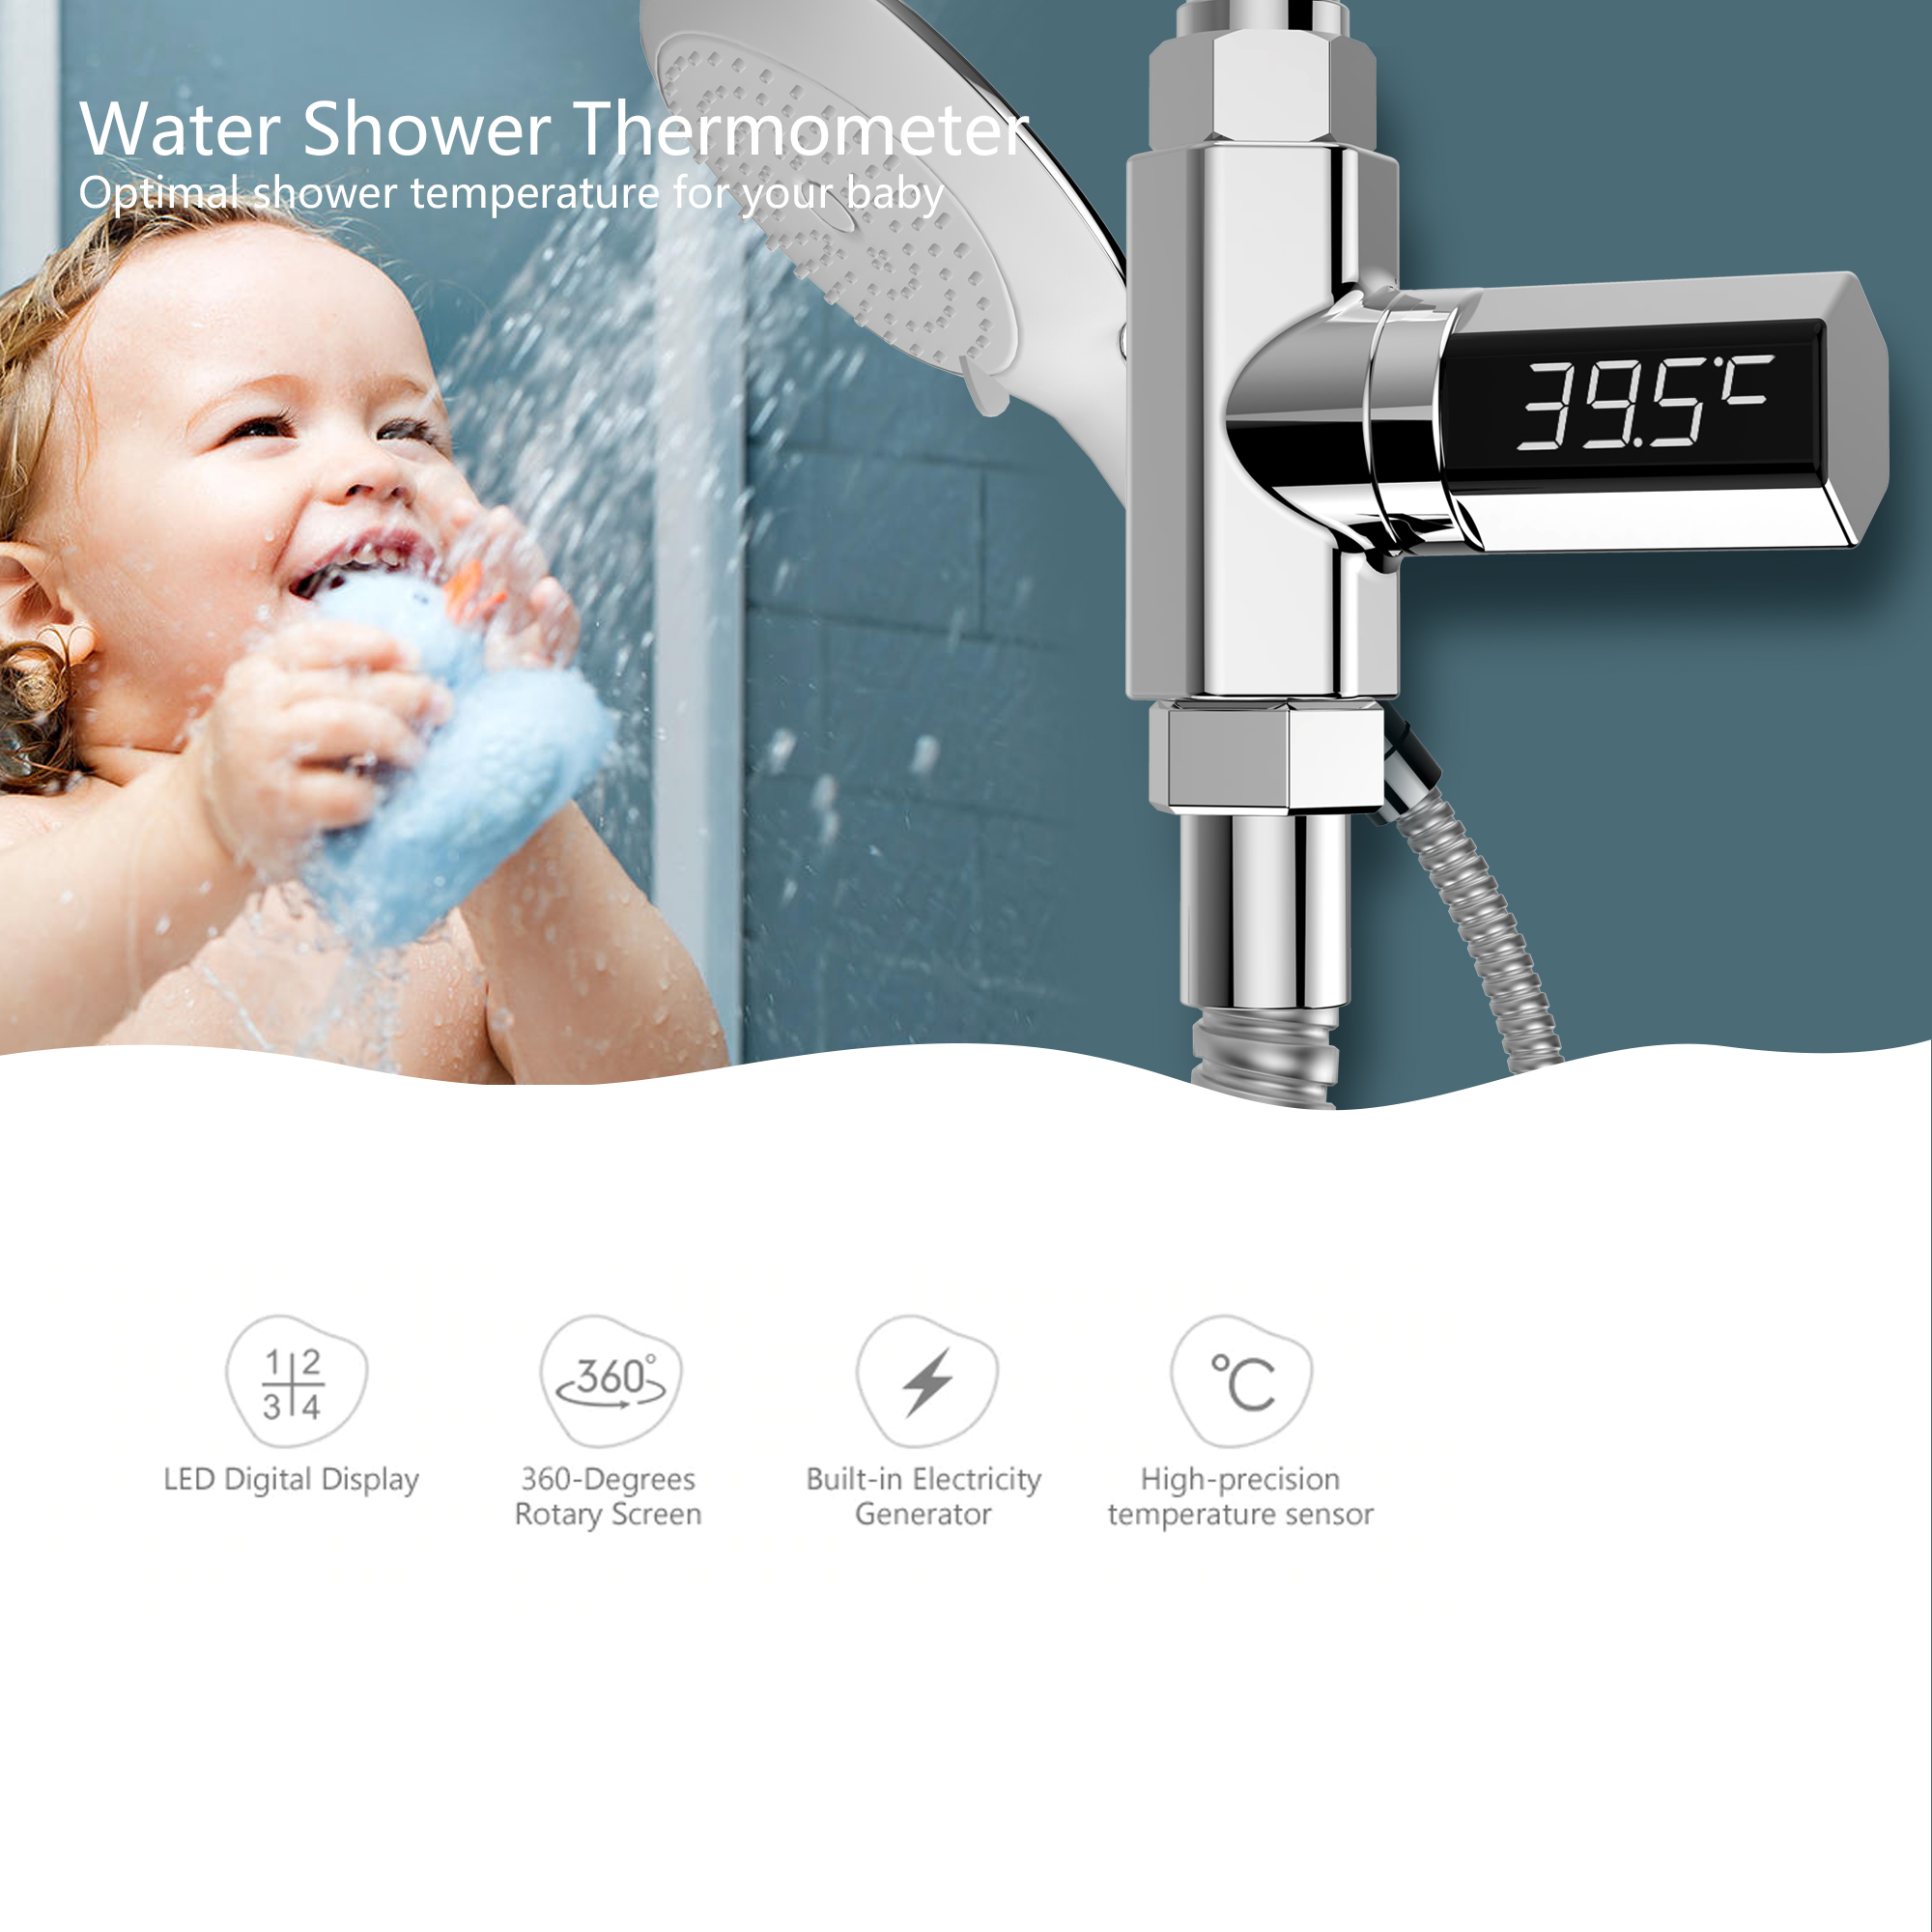 Loskii LW-102 LED Celsius Display Water Shower Thermometer Celsius Flow Self-Generating Electricity Water Temperture Meter Monitor Energy Smart Meter 7